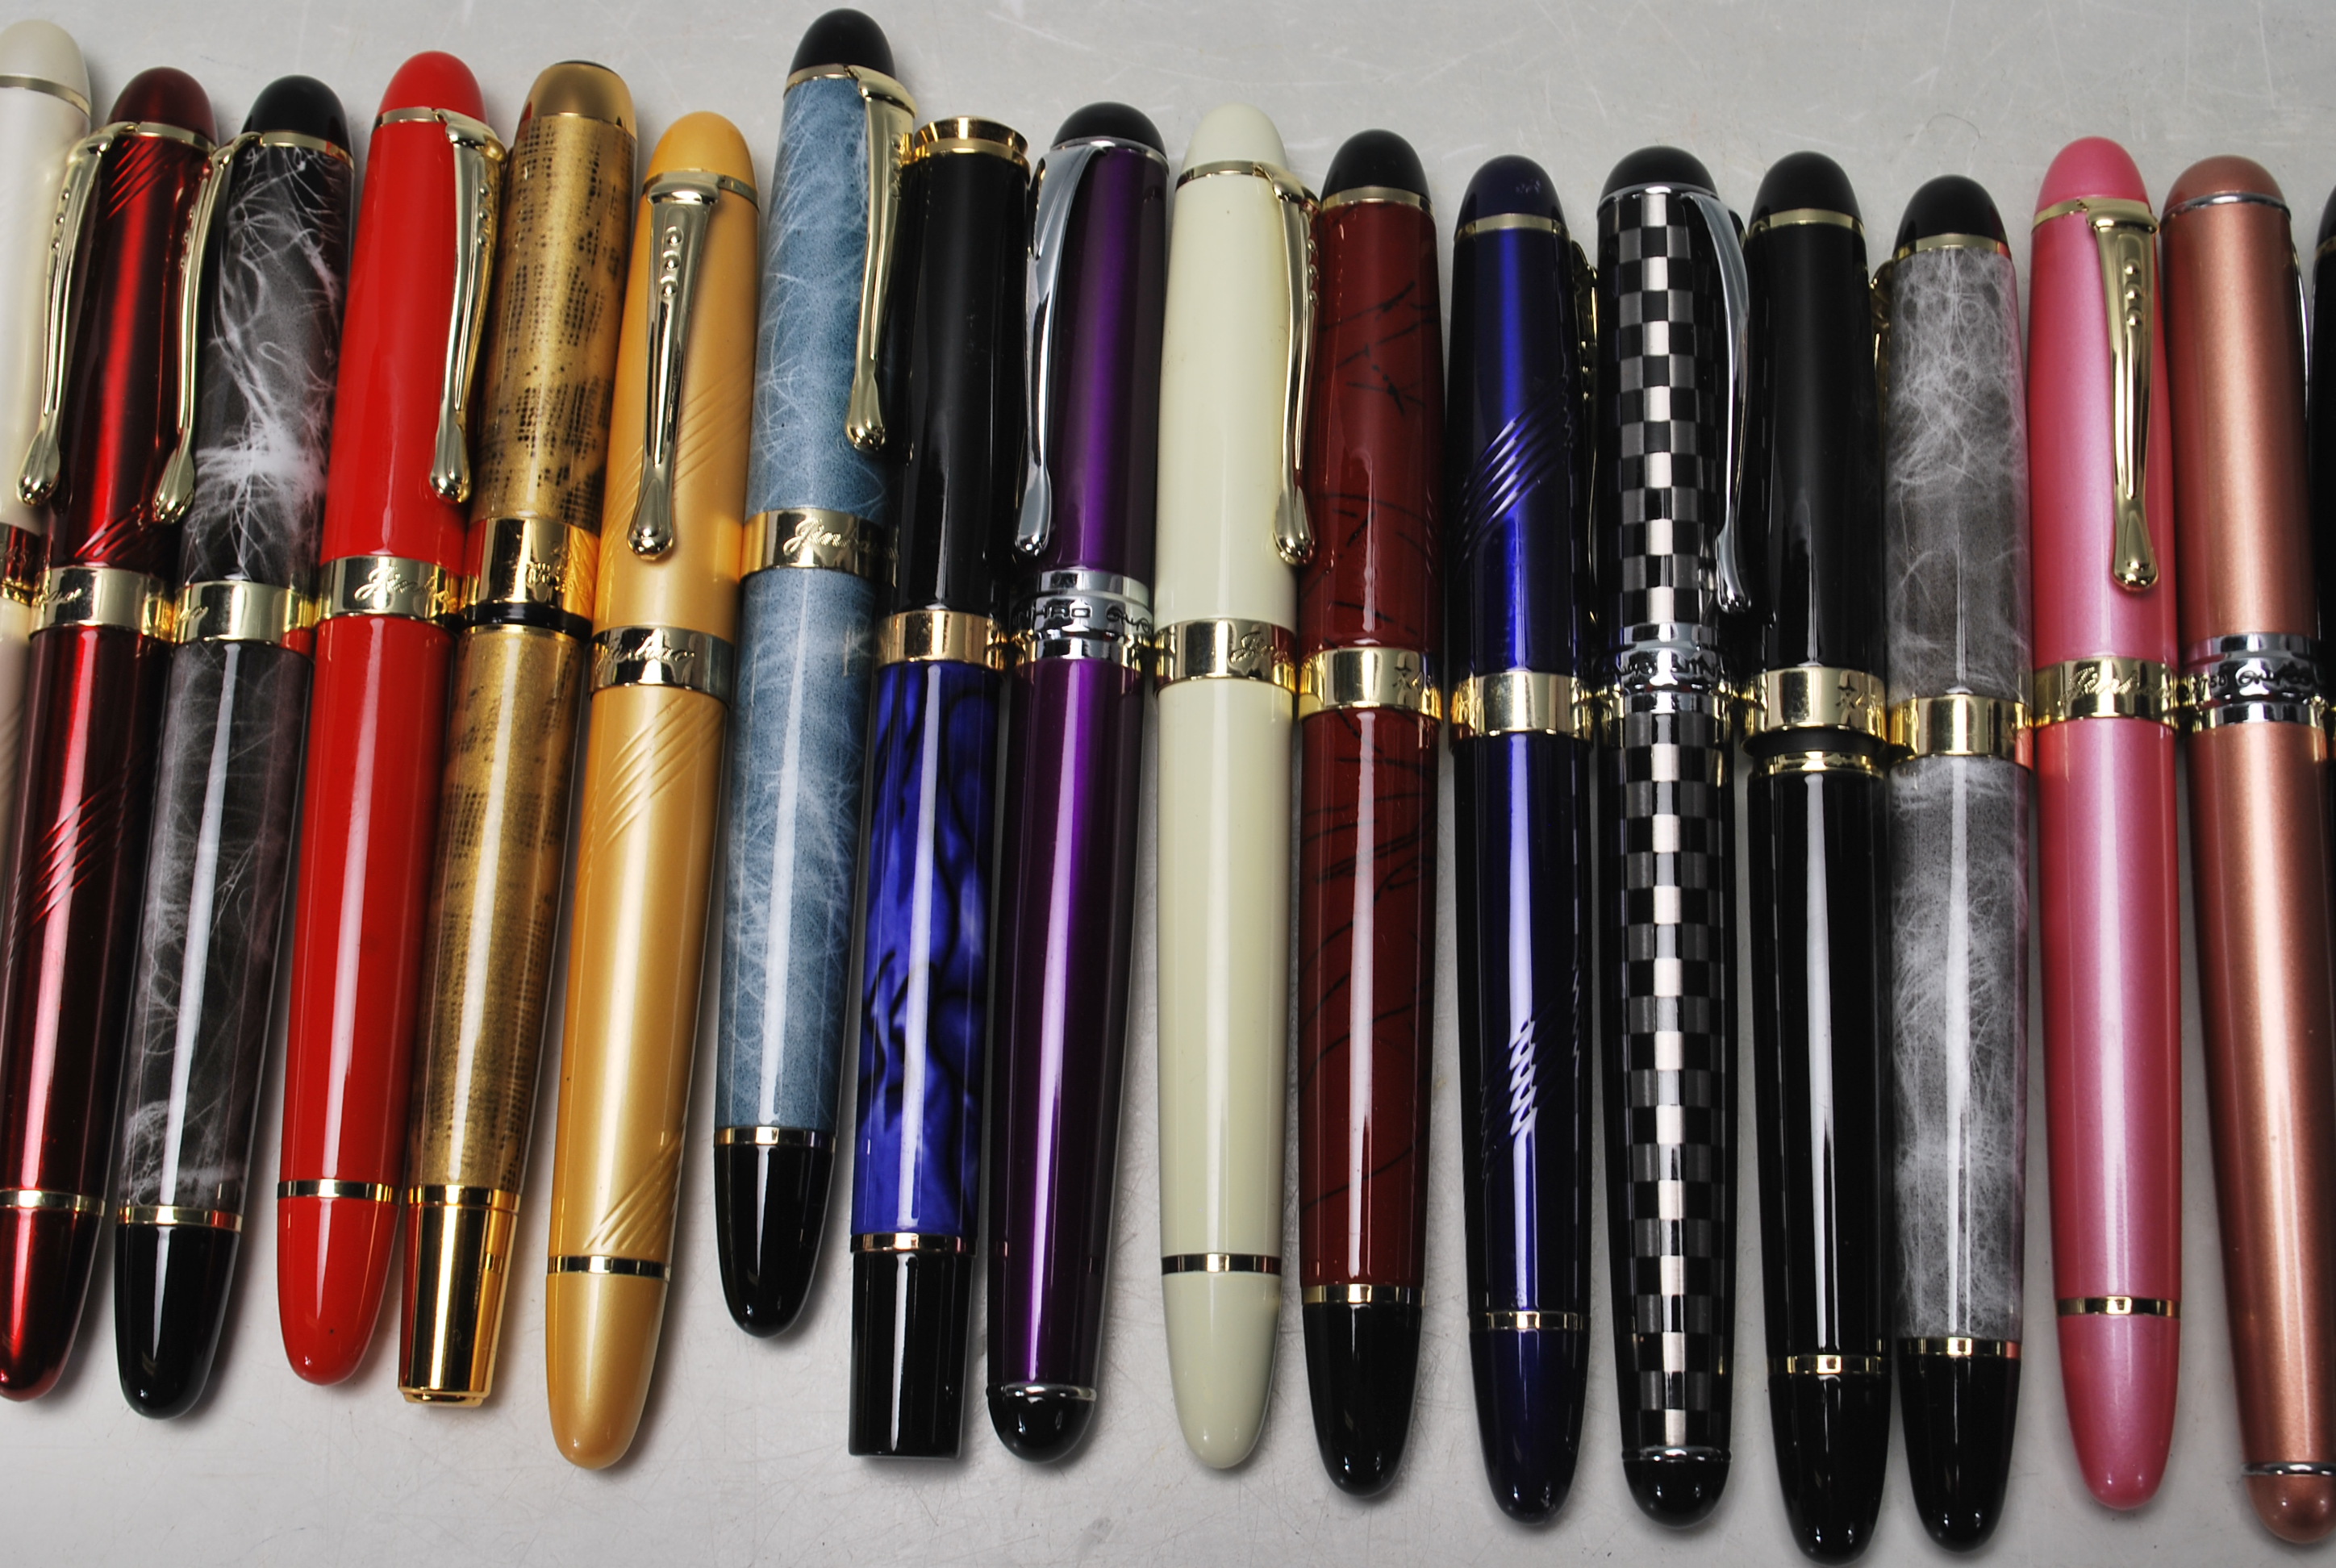 21 CHINESE JINHAO FOUNTAIN PENS - Image 3 of 9